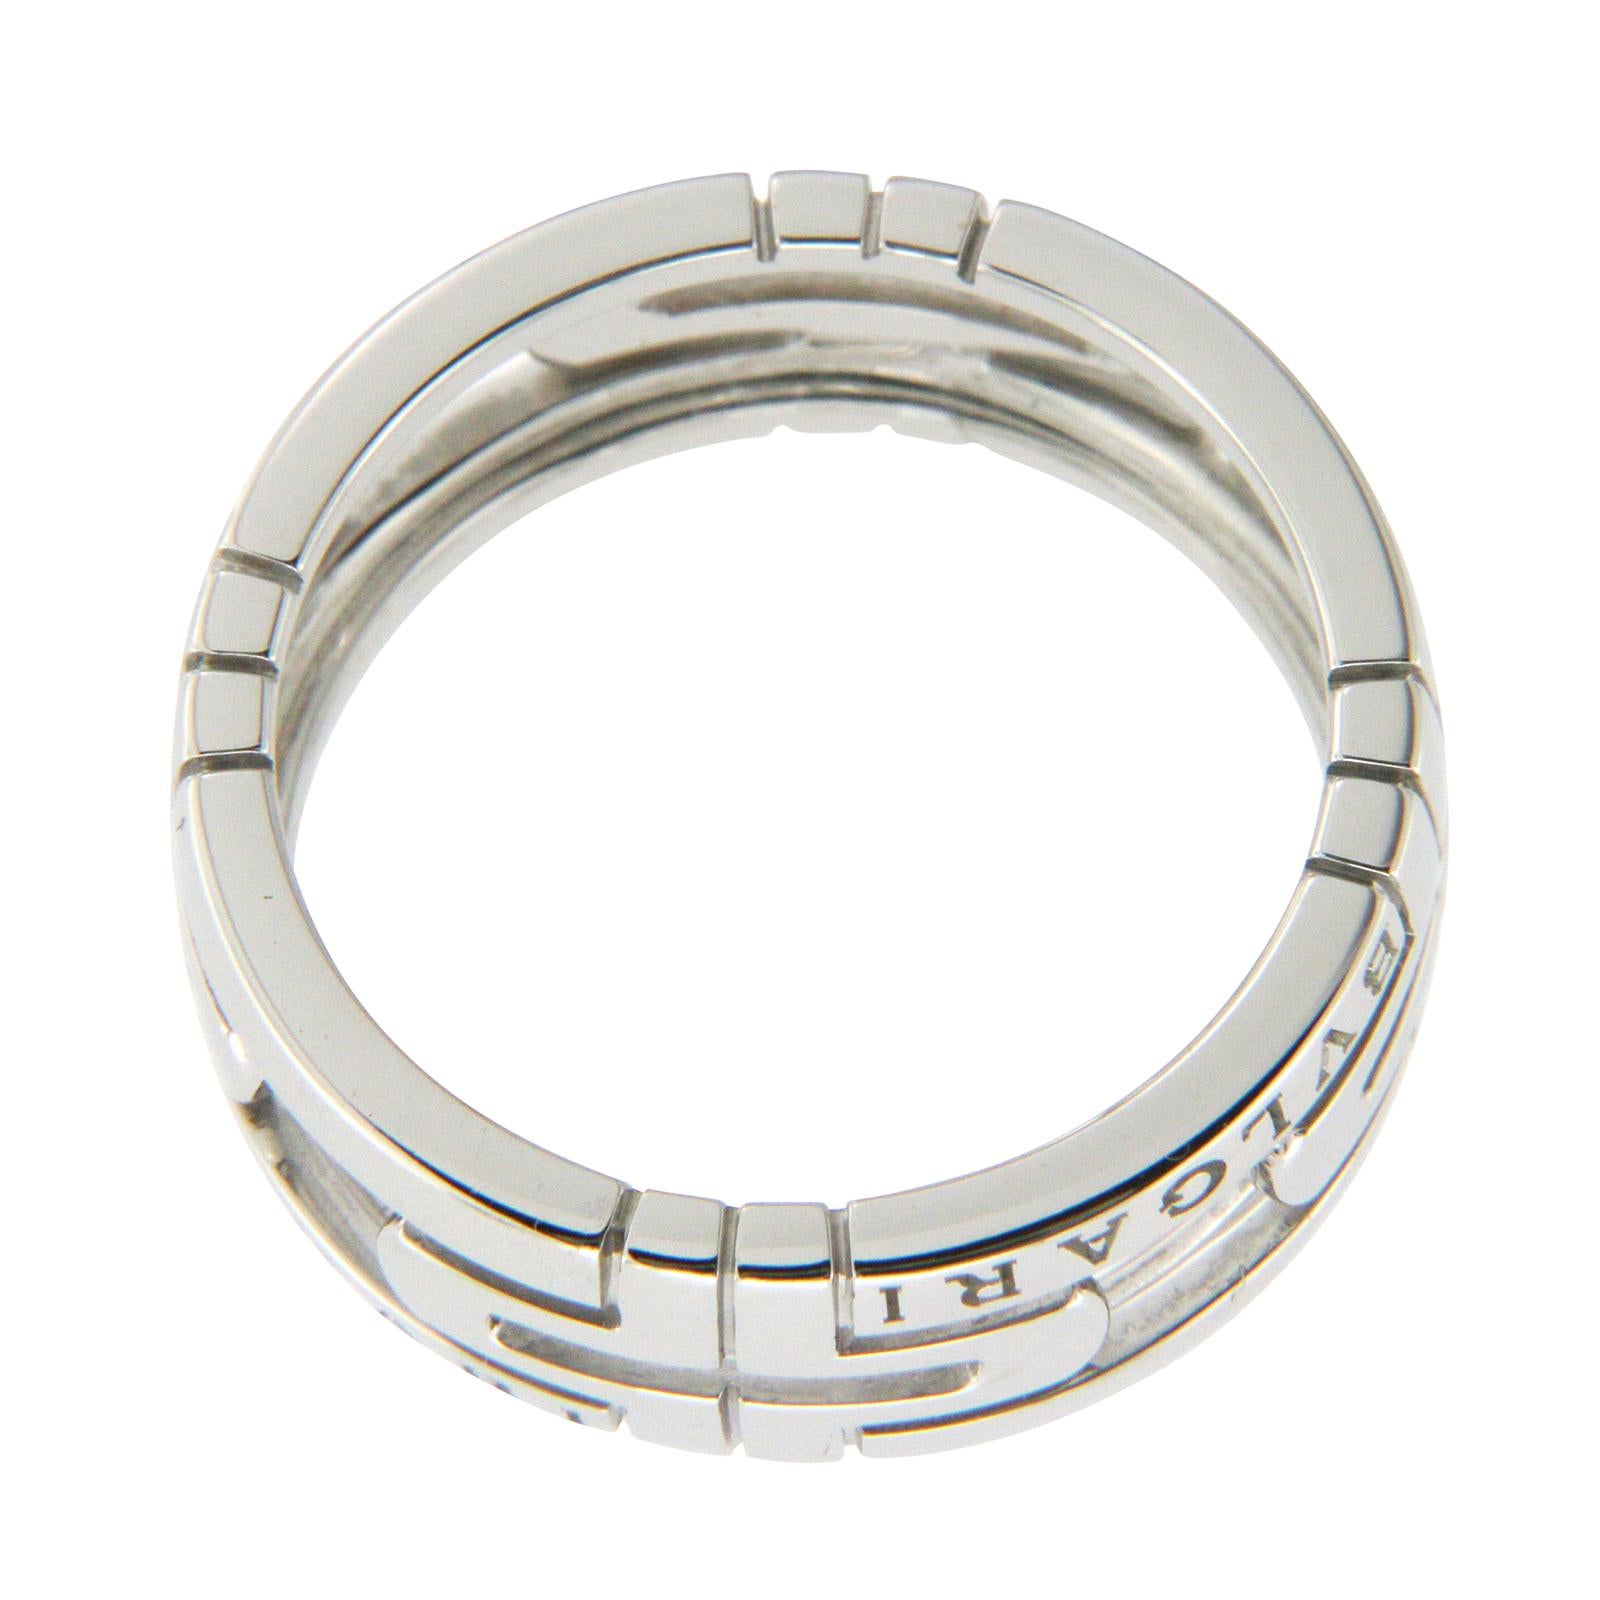 Type: Ring
Top: 7 mm
Band Width: 7 mm
Metal: White Gold
Metal Purity: 18K
Hallmarks: Bvlgari 750 Italy 57
Total Weight: 6.8 Grams
Stone Type: None
Condition: Per-Owned
Stock Number: U49
Size: 8.25